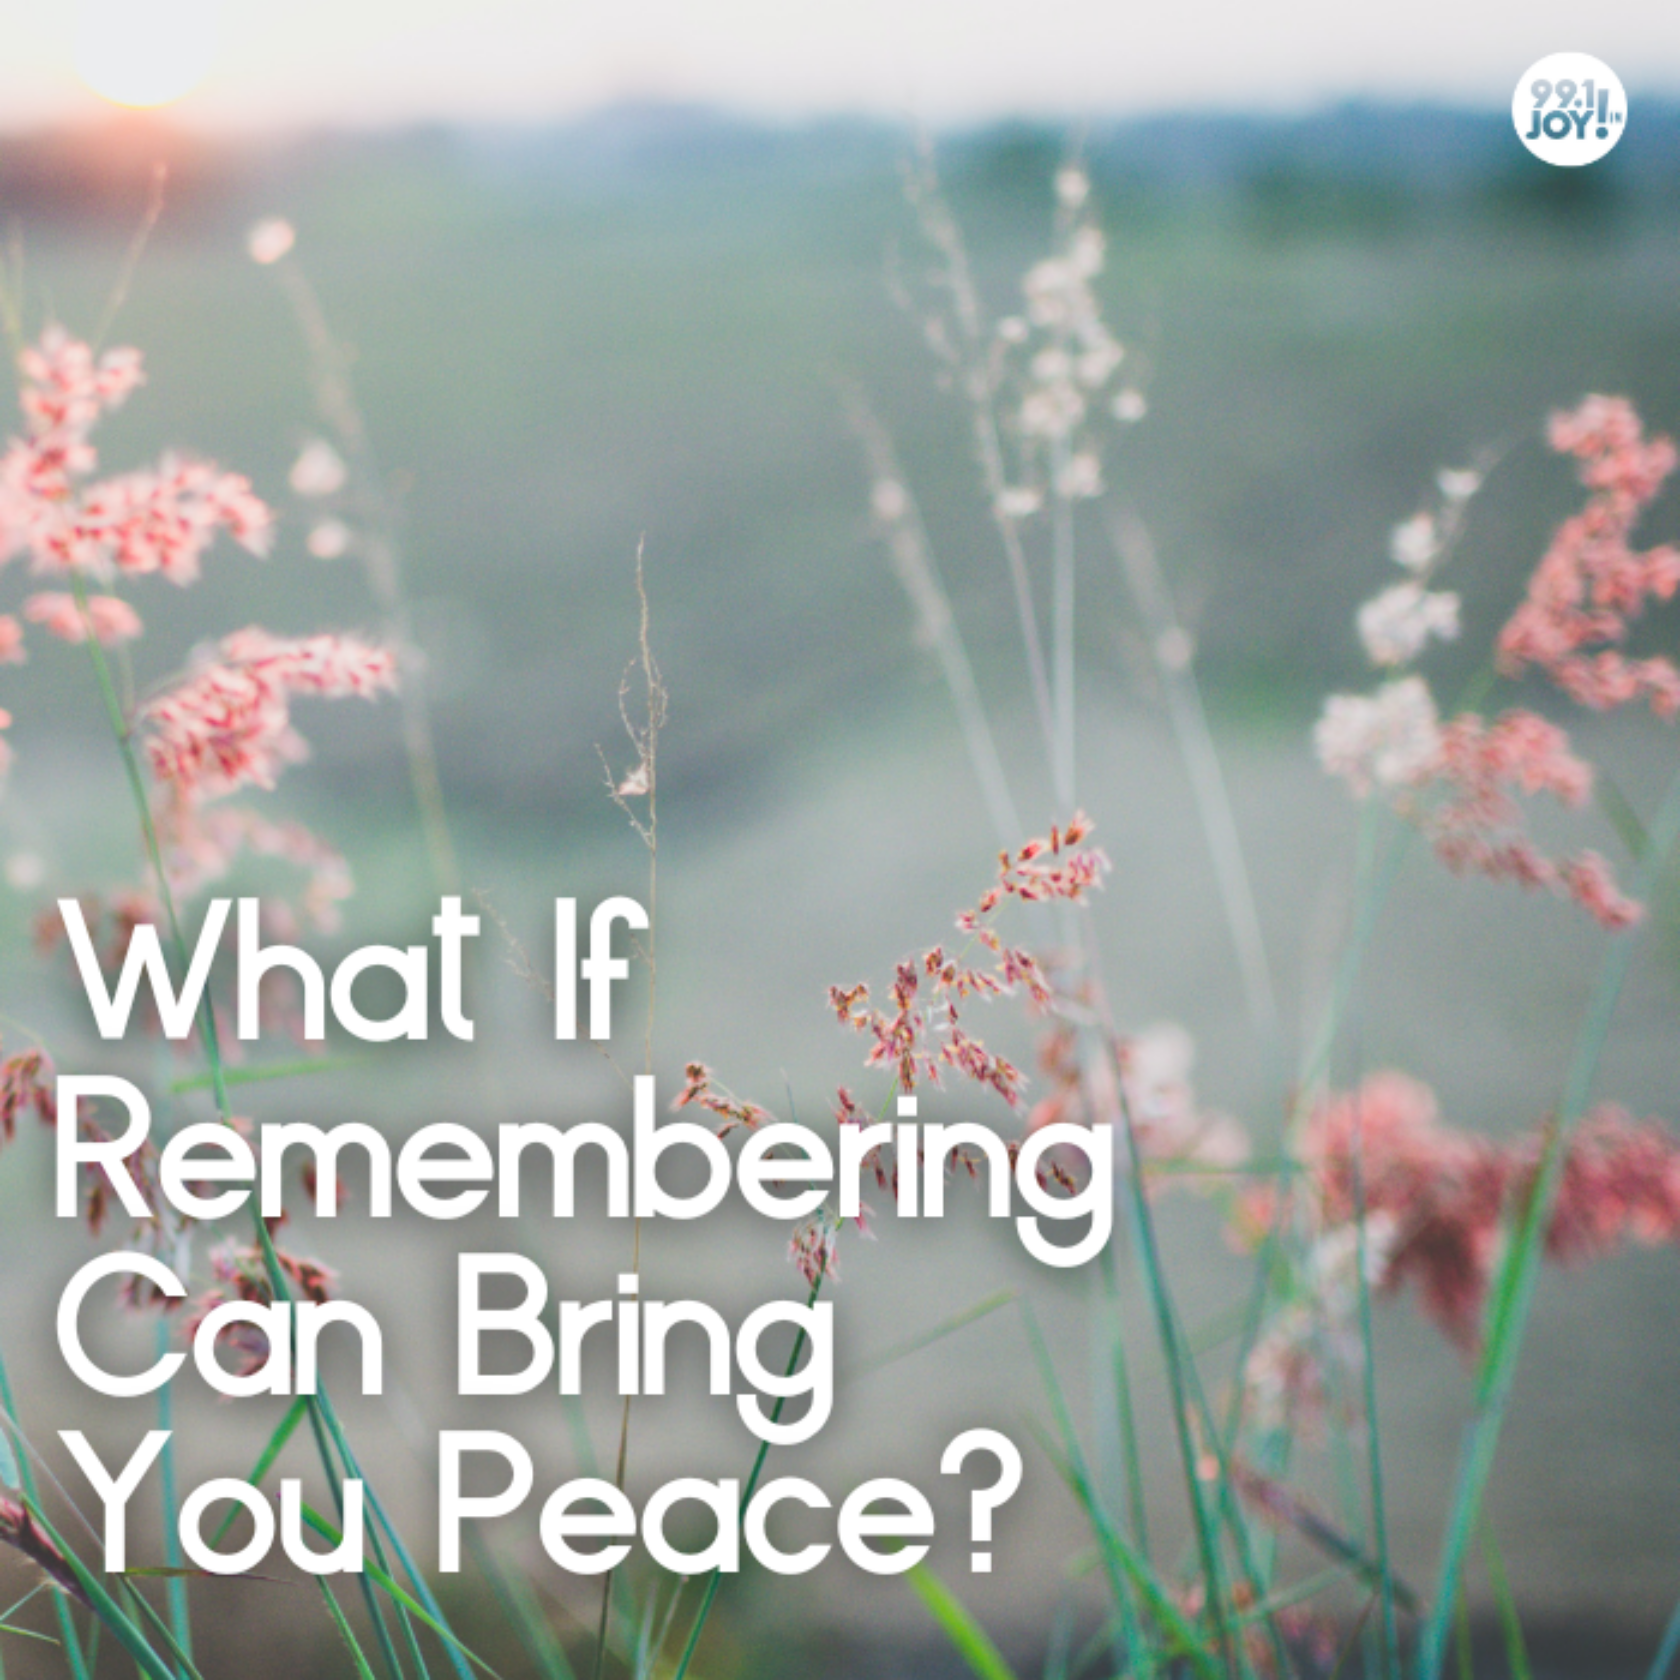 What If Remembering Can Bring You Peace?